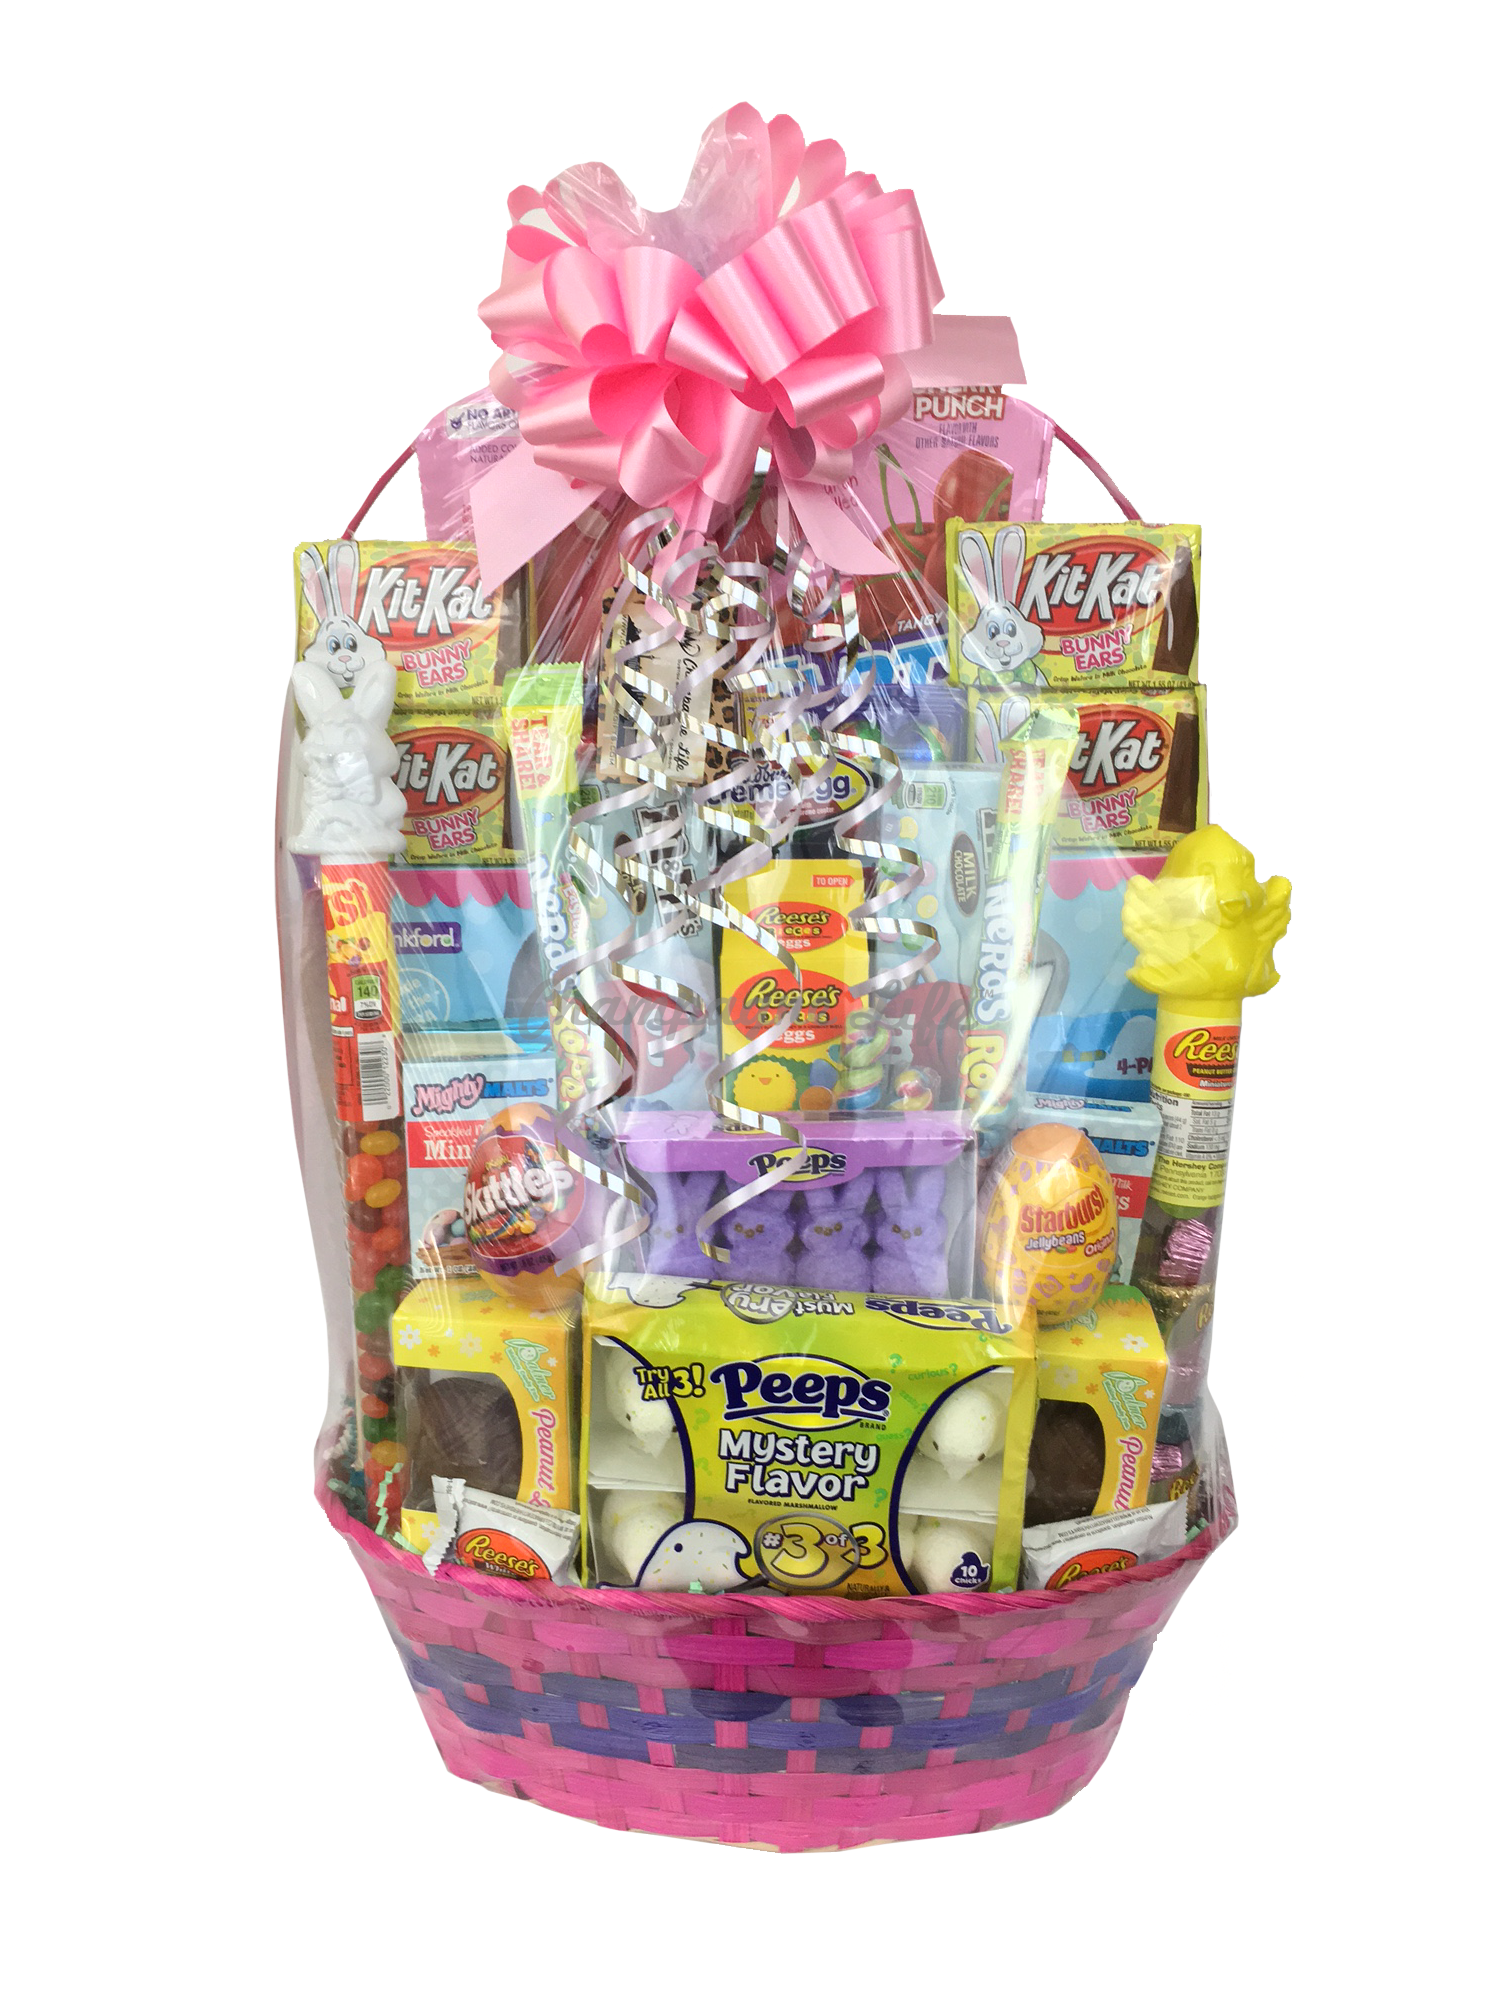 Easter Wishes: Bunny & Sweets Gift Basket at Gift Baskets ETC